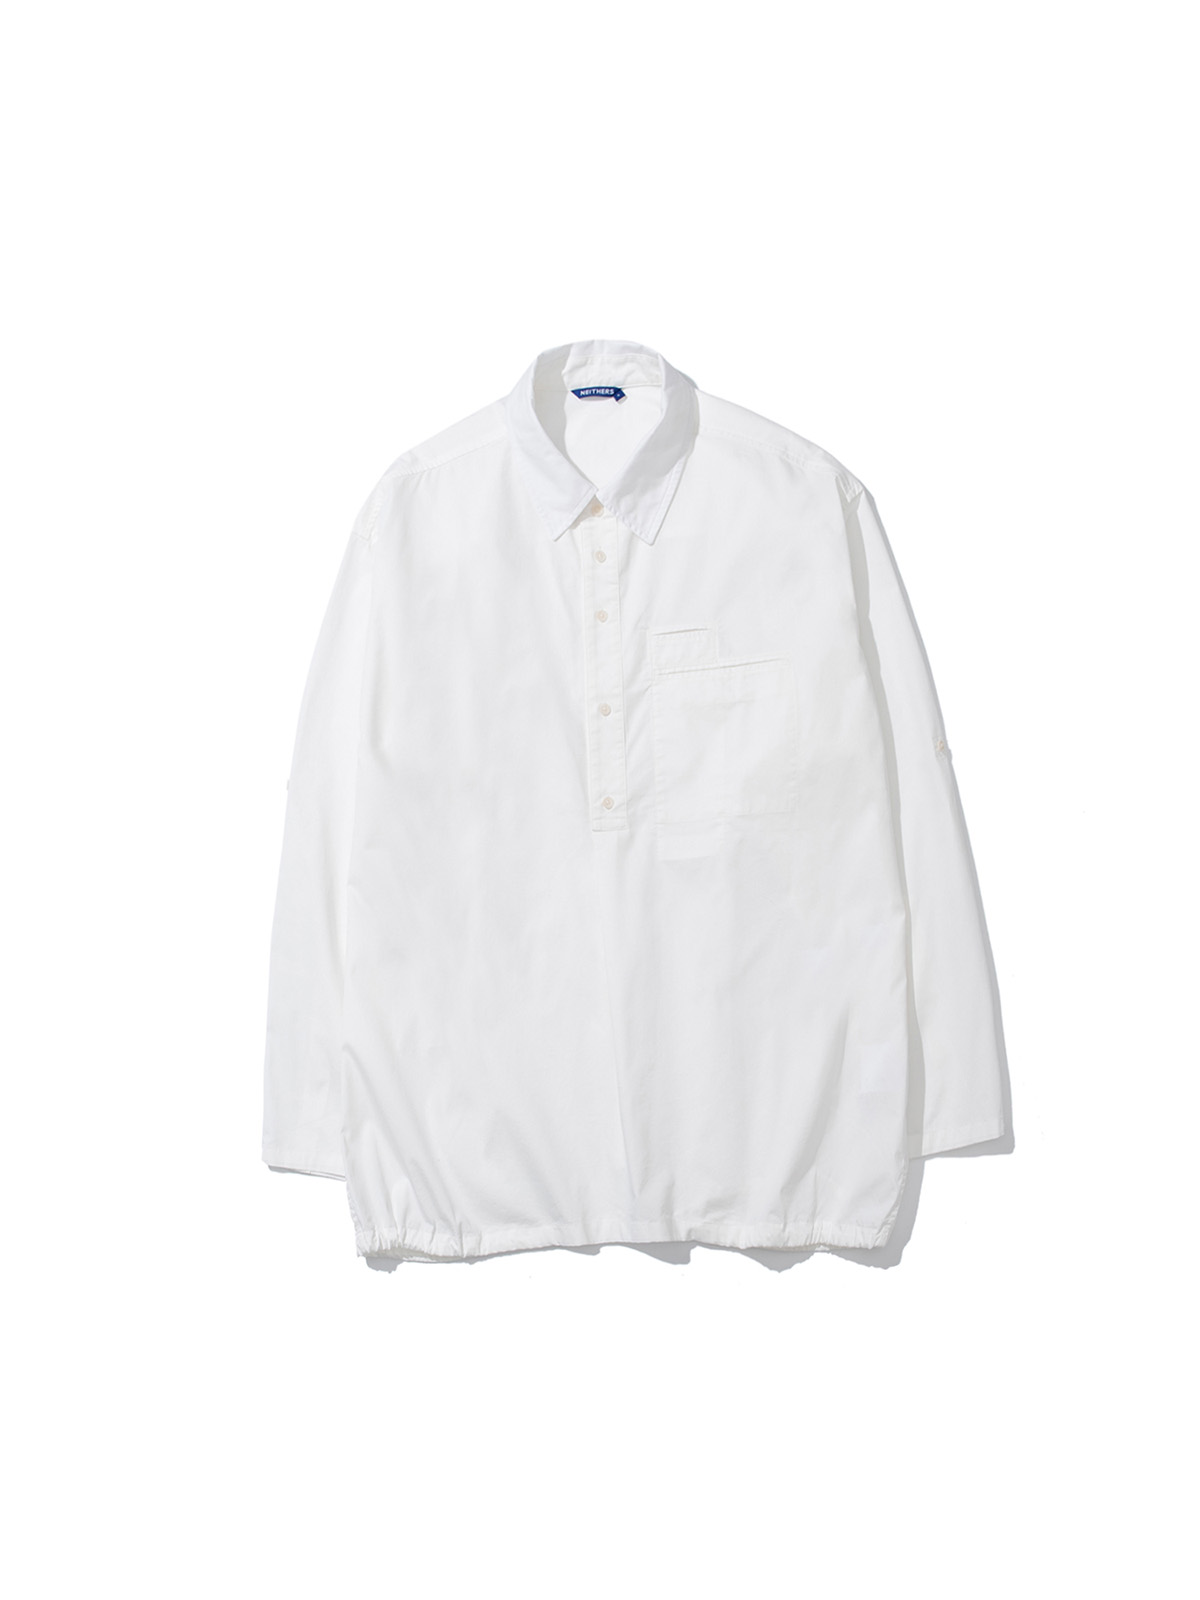 PAINTER PULLOVER SHIRT (OFF WHITE)